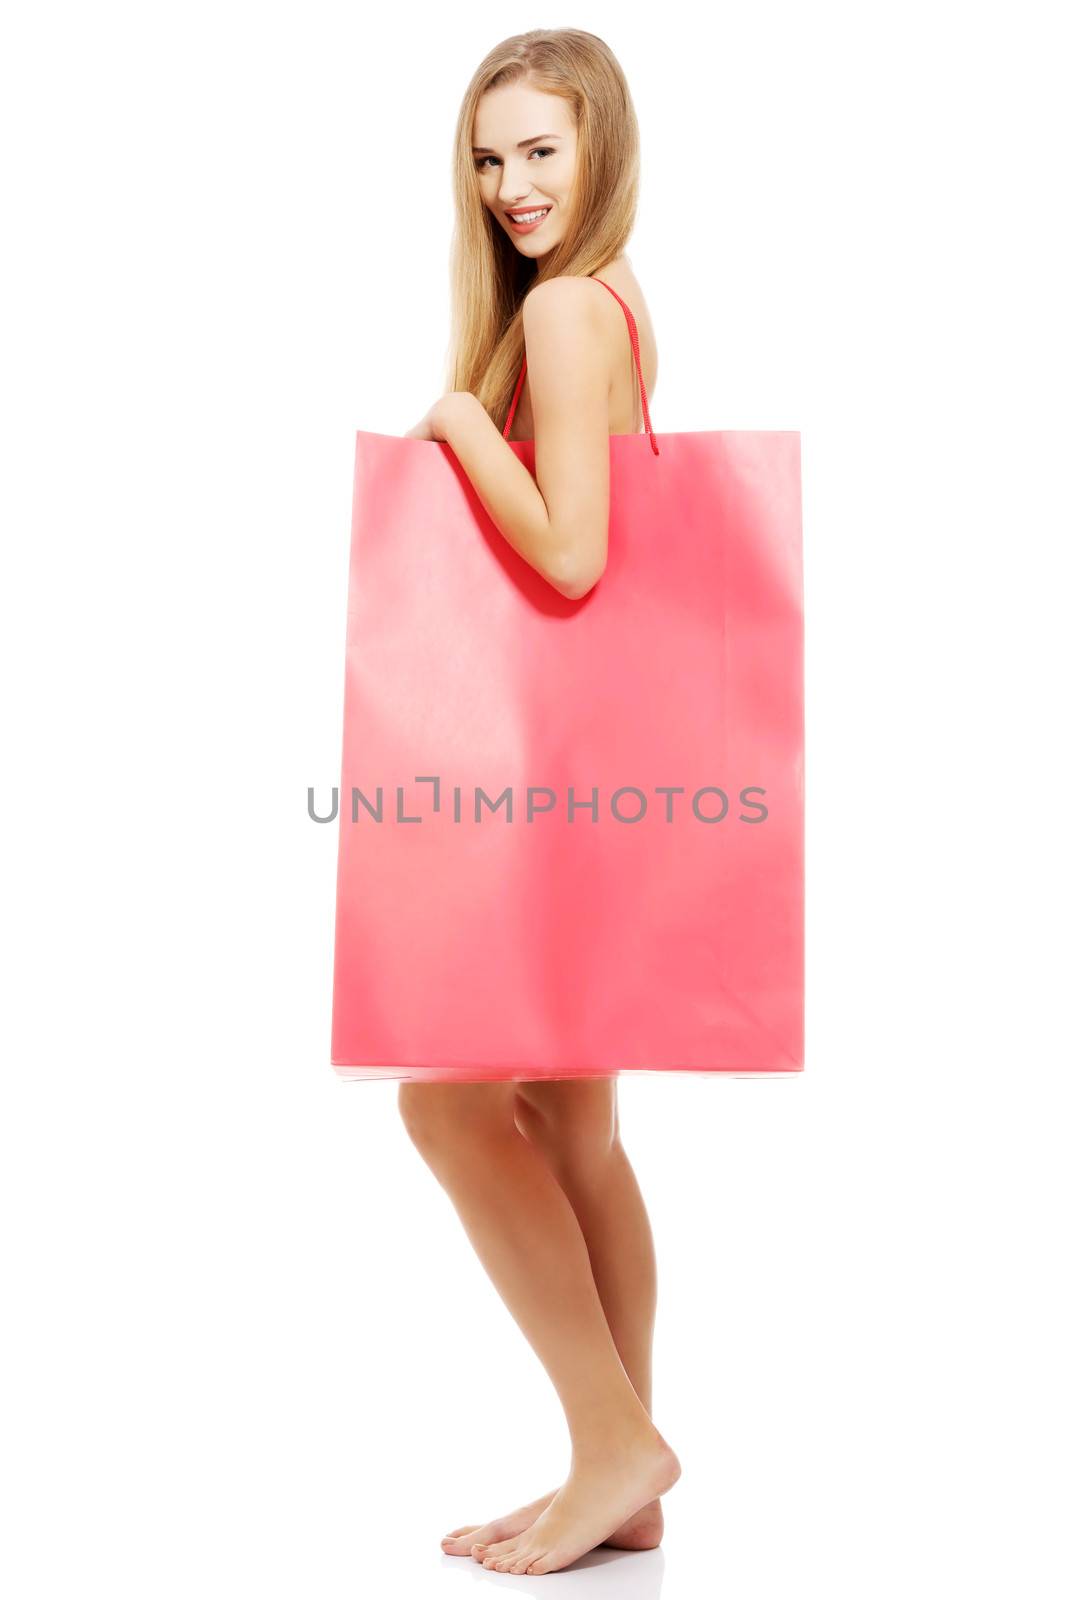 Beautiful naked woman with big red shopping bag. Isolated on white.